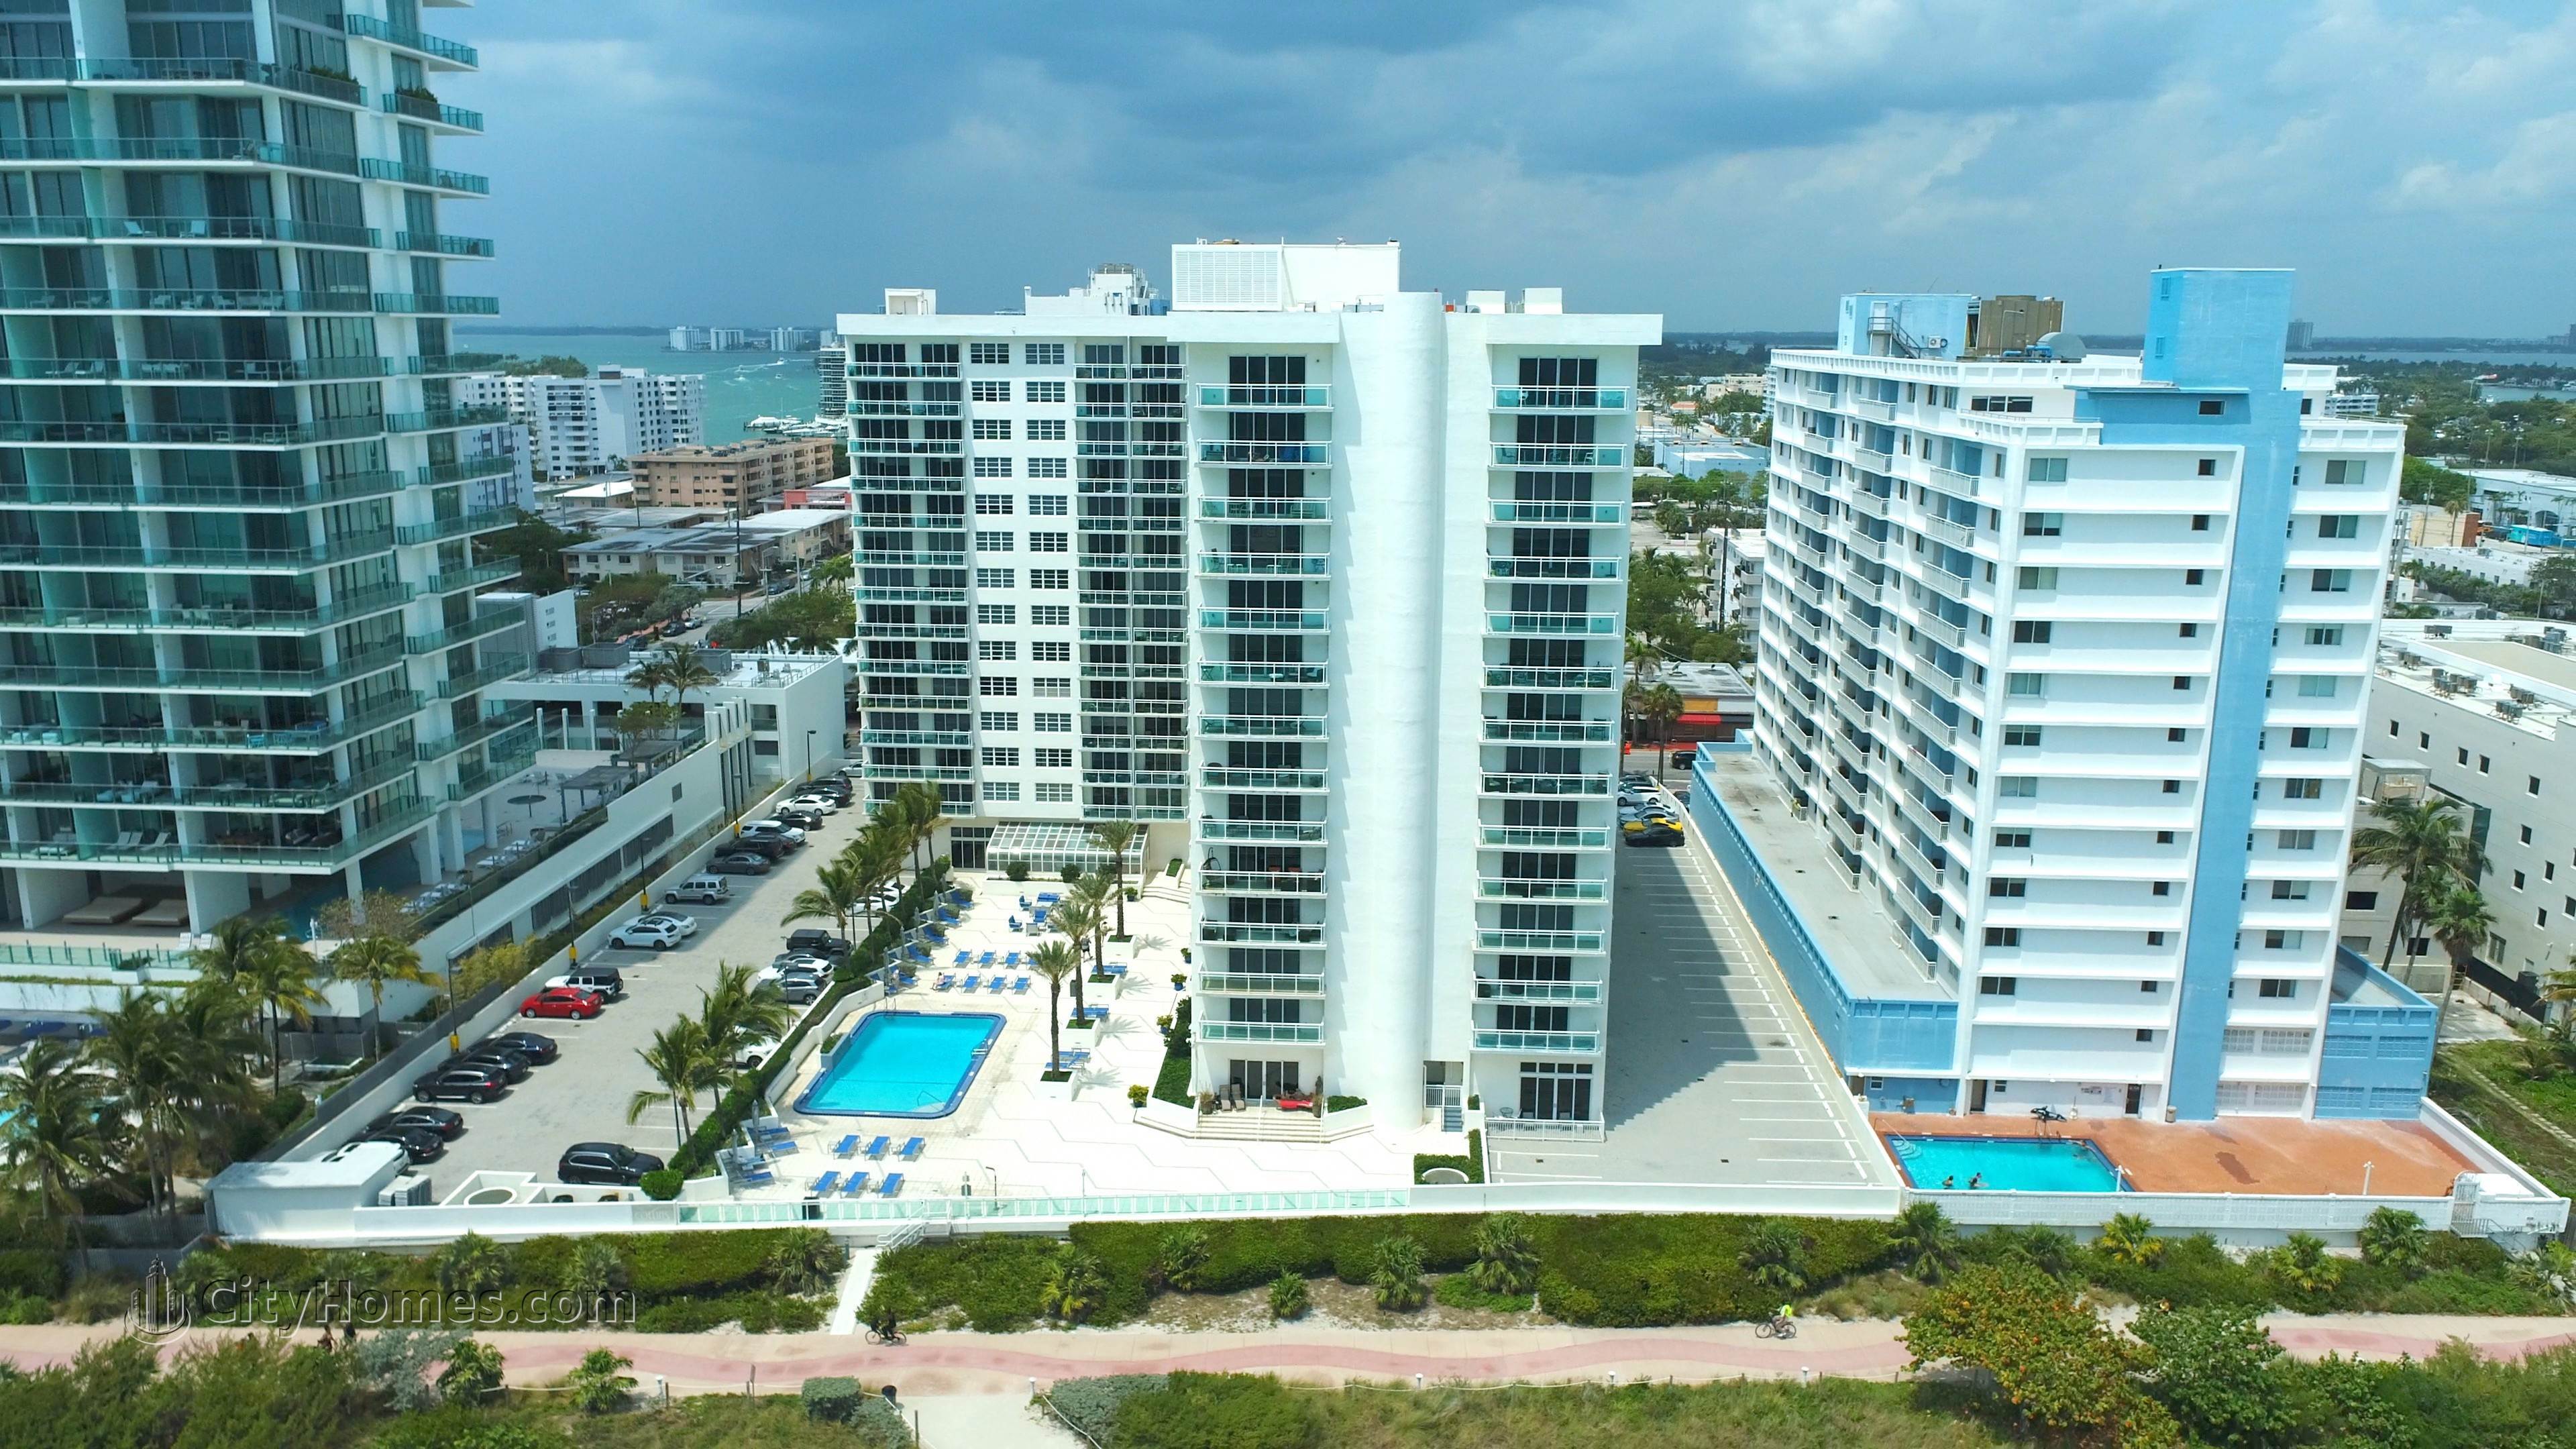 2. THE COLLINS xây dựng tại 6917 Collins Avenue, Atlantic Heights, Miami Beach, FL 33141